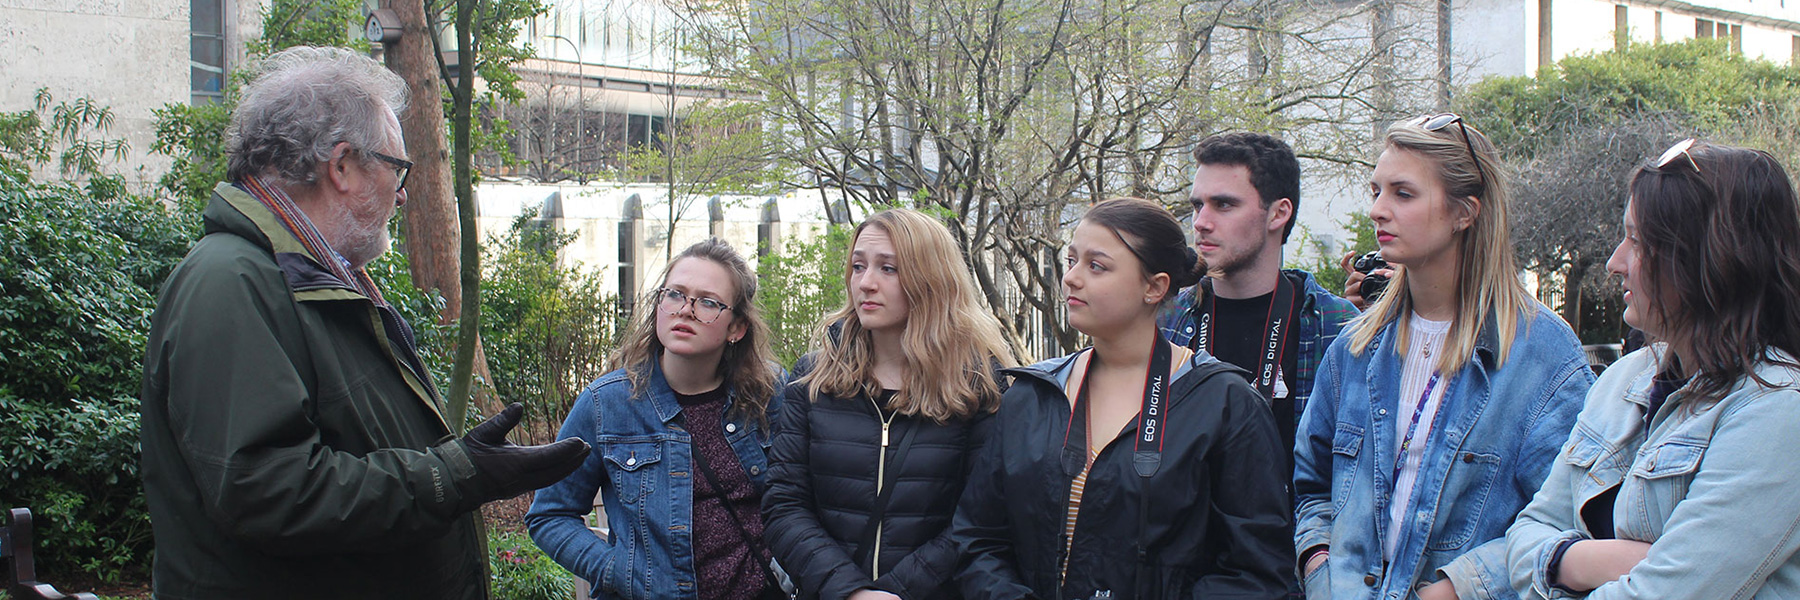 Tour guide talking to a group of students